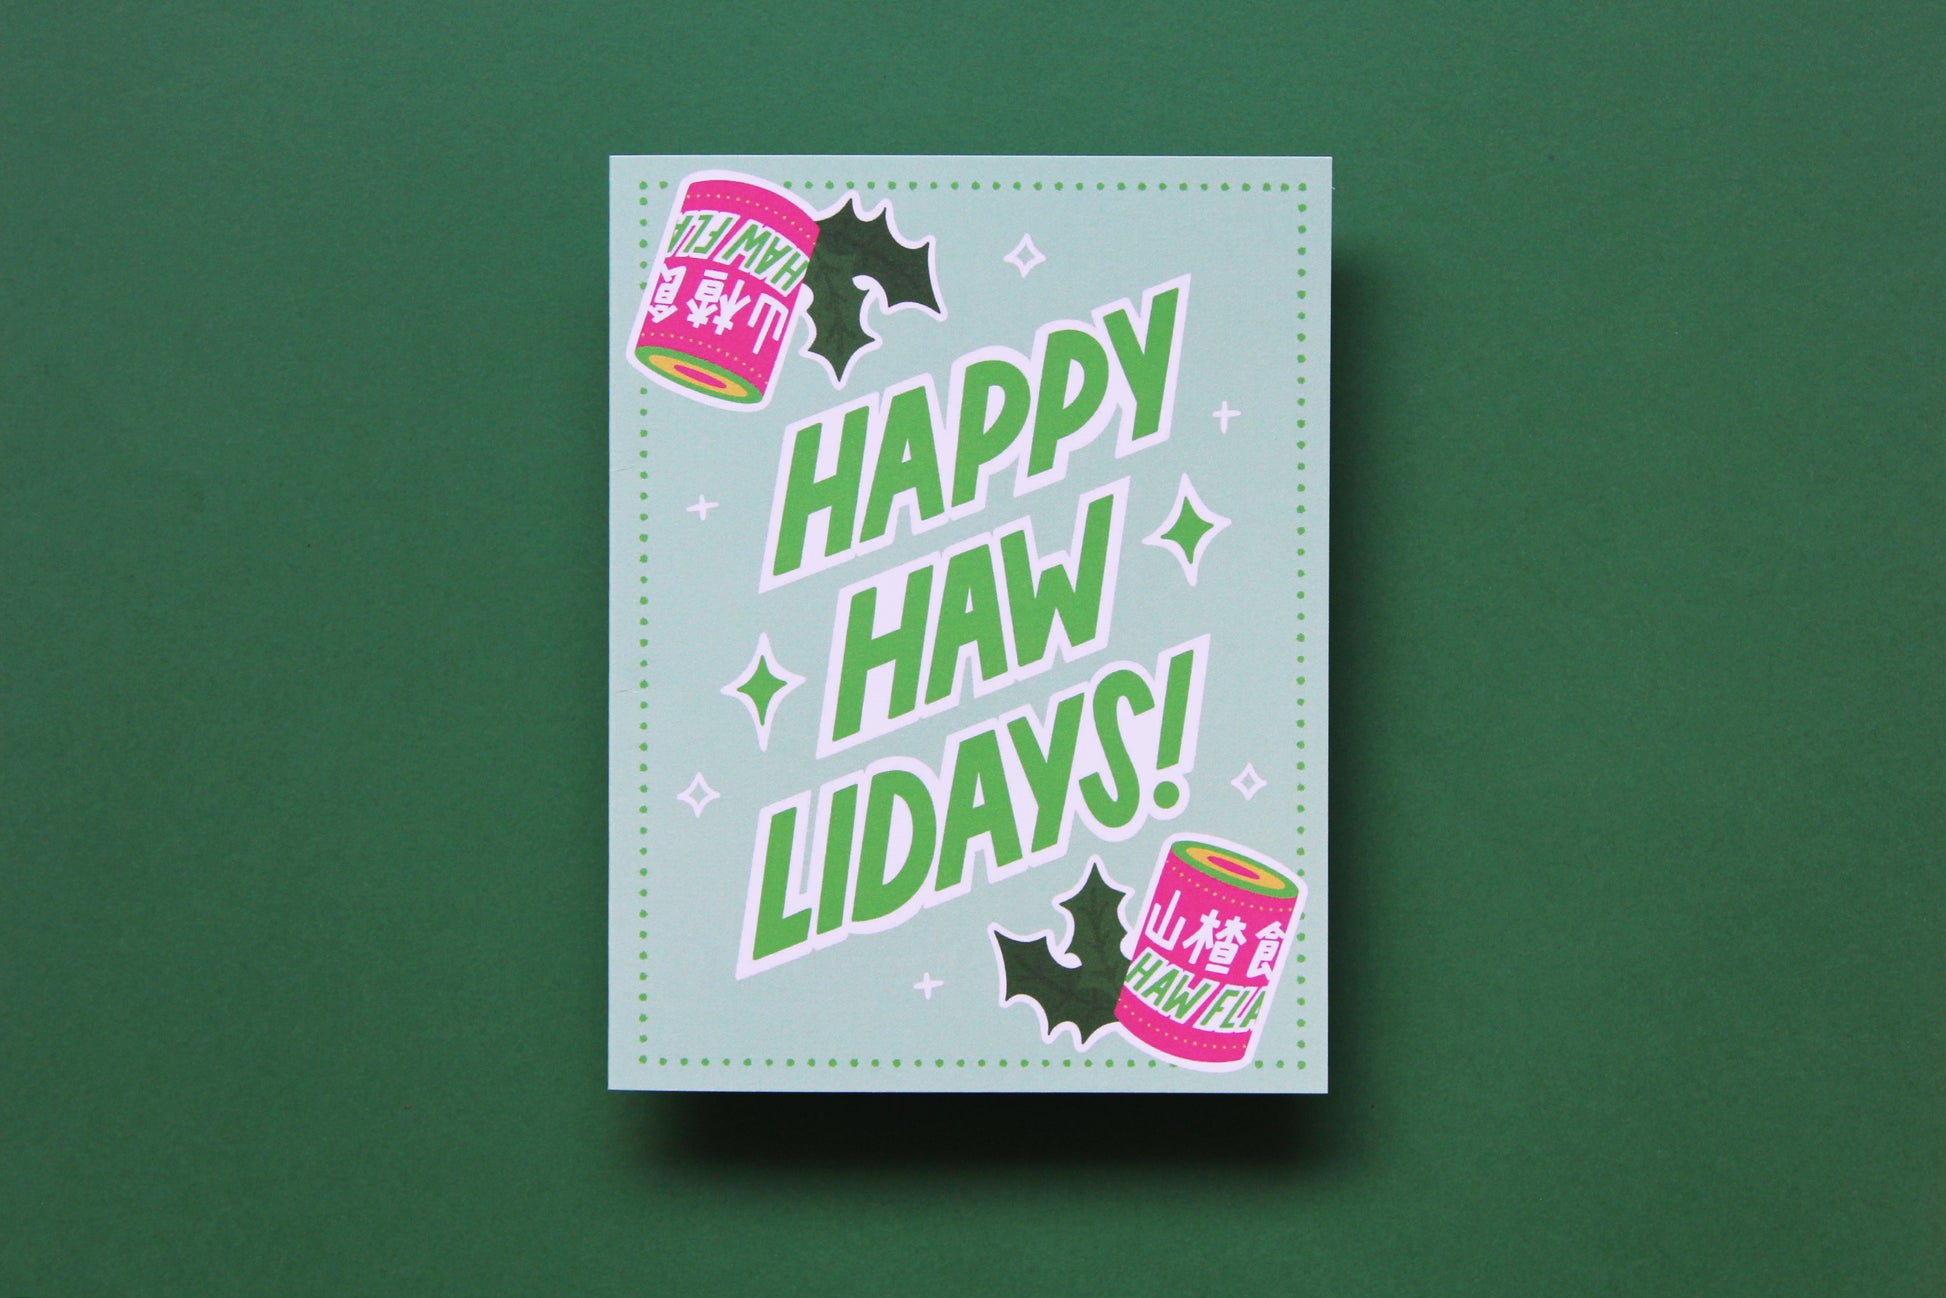 A photo of a greeting card with haw flakes and lettering that says "Happy Haw-lidays!" on a green background.